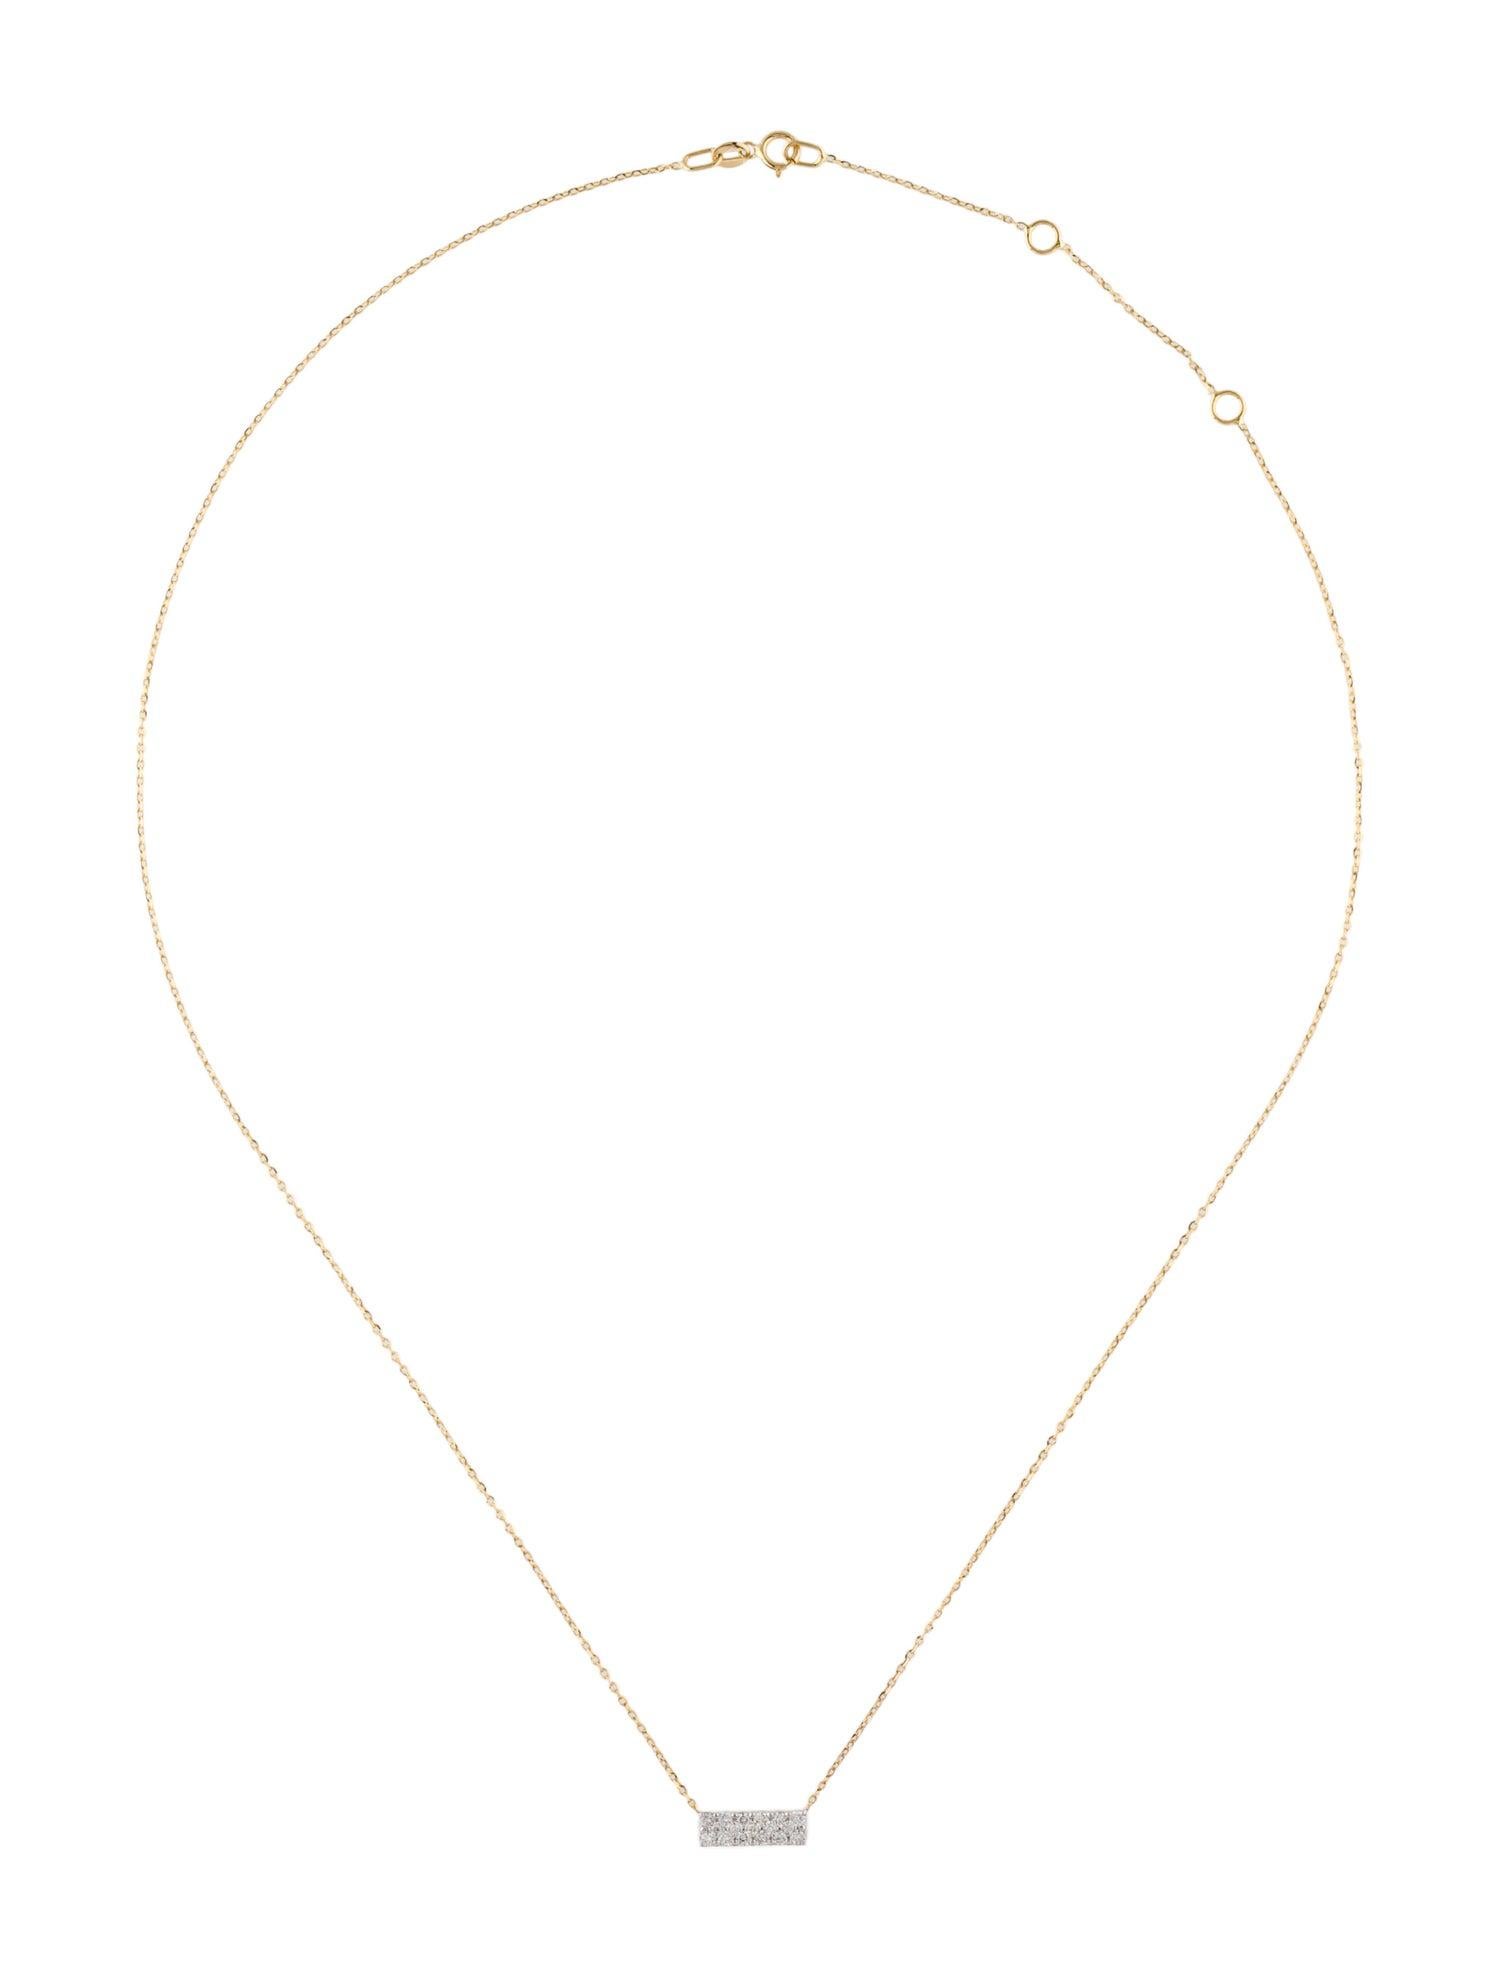 Contemporary 14k Yellow Gold 0.23 Carat Diamond Necklace For Sale